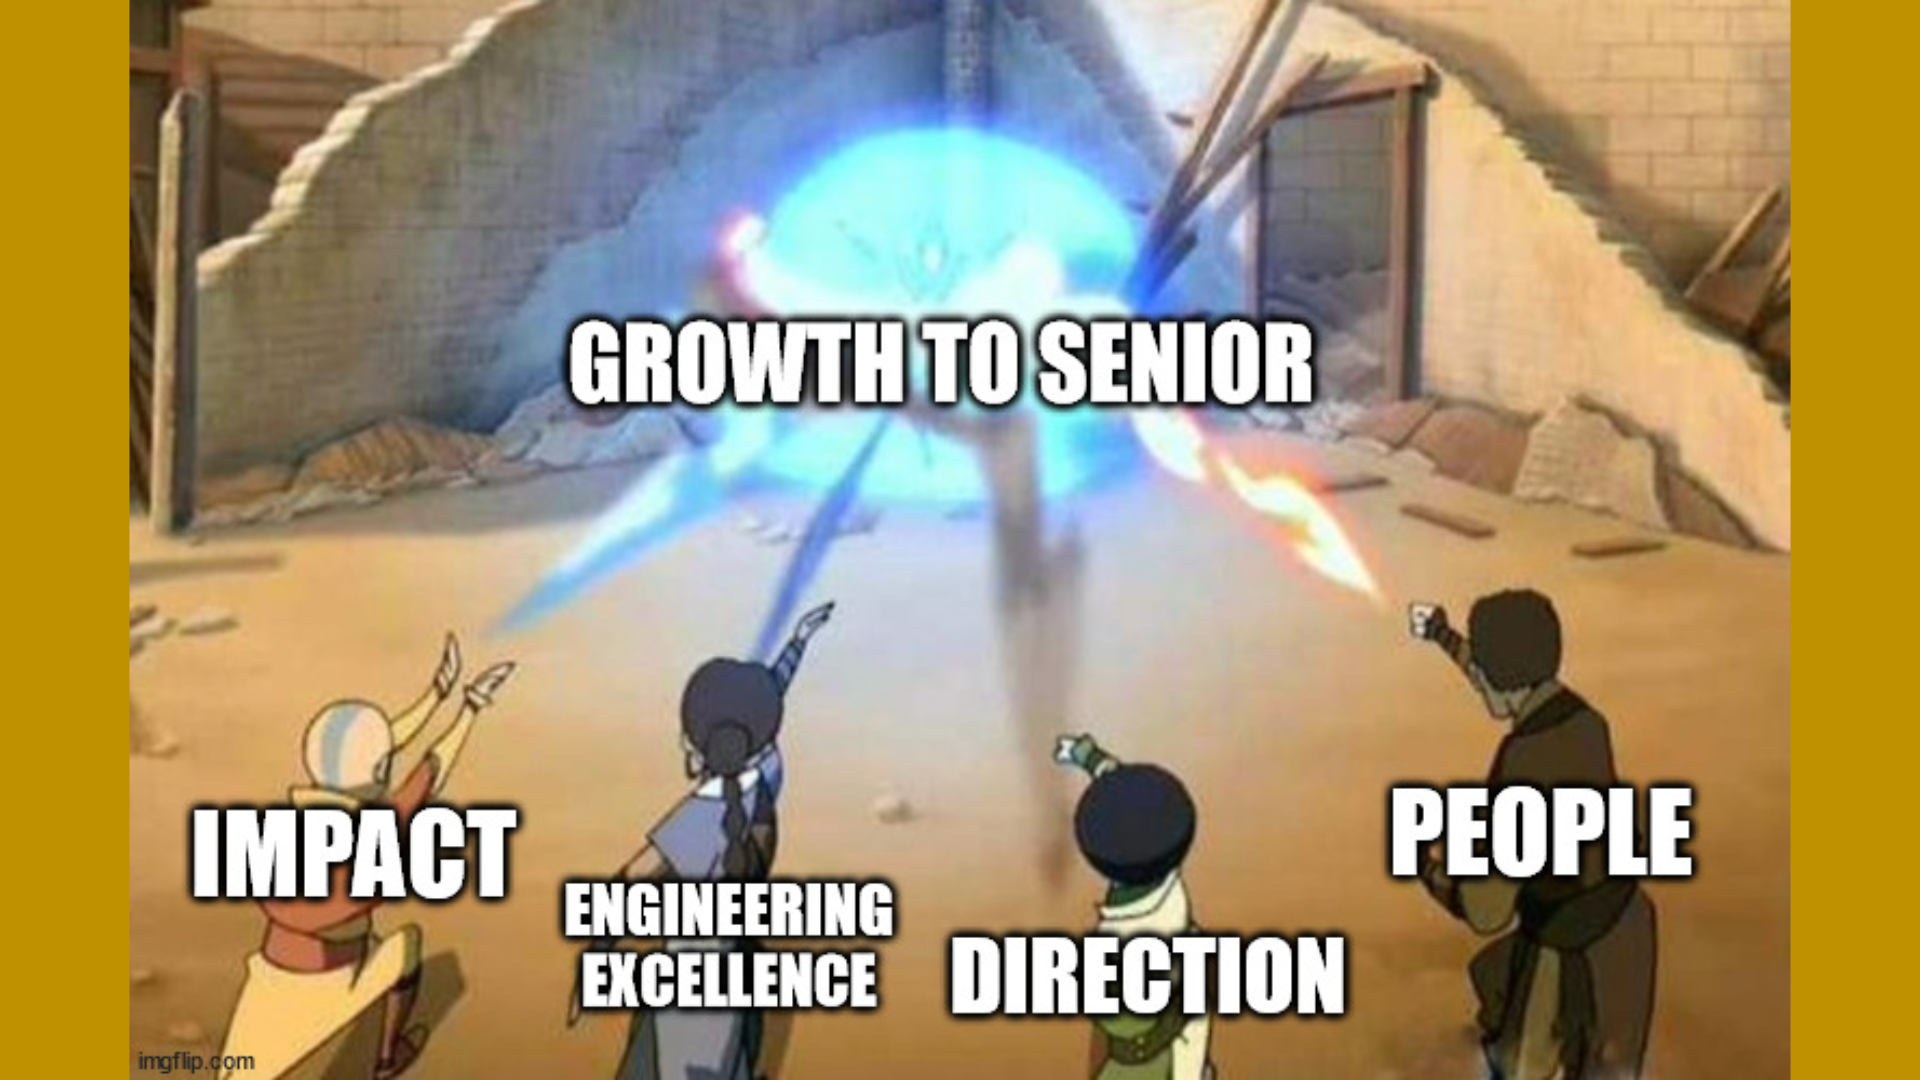 Grow From Mid-Level To Senior Engineer [Part 4] - Structuring Your Growth